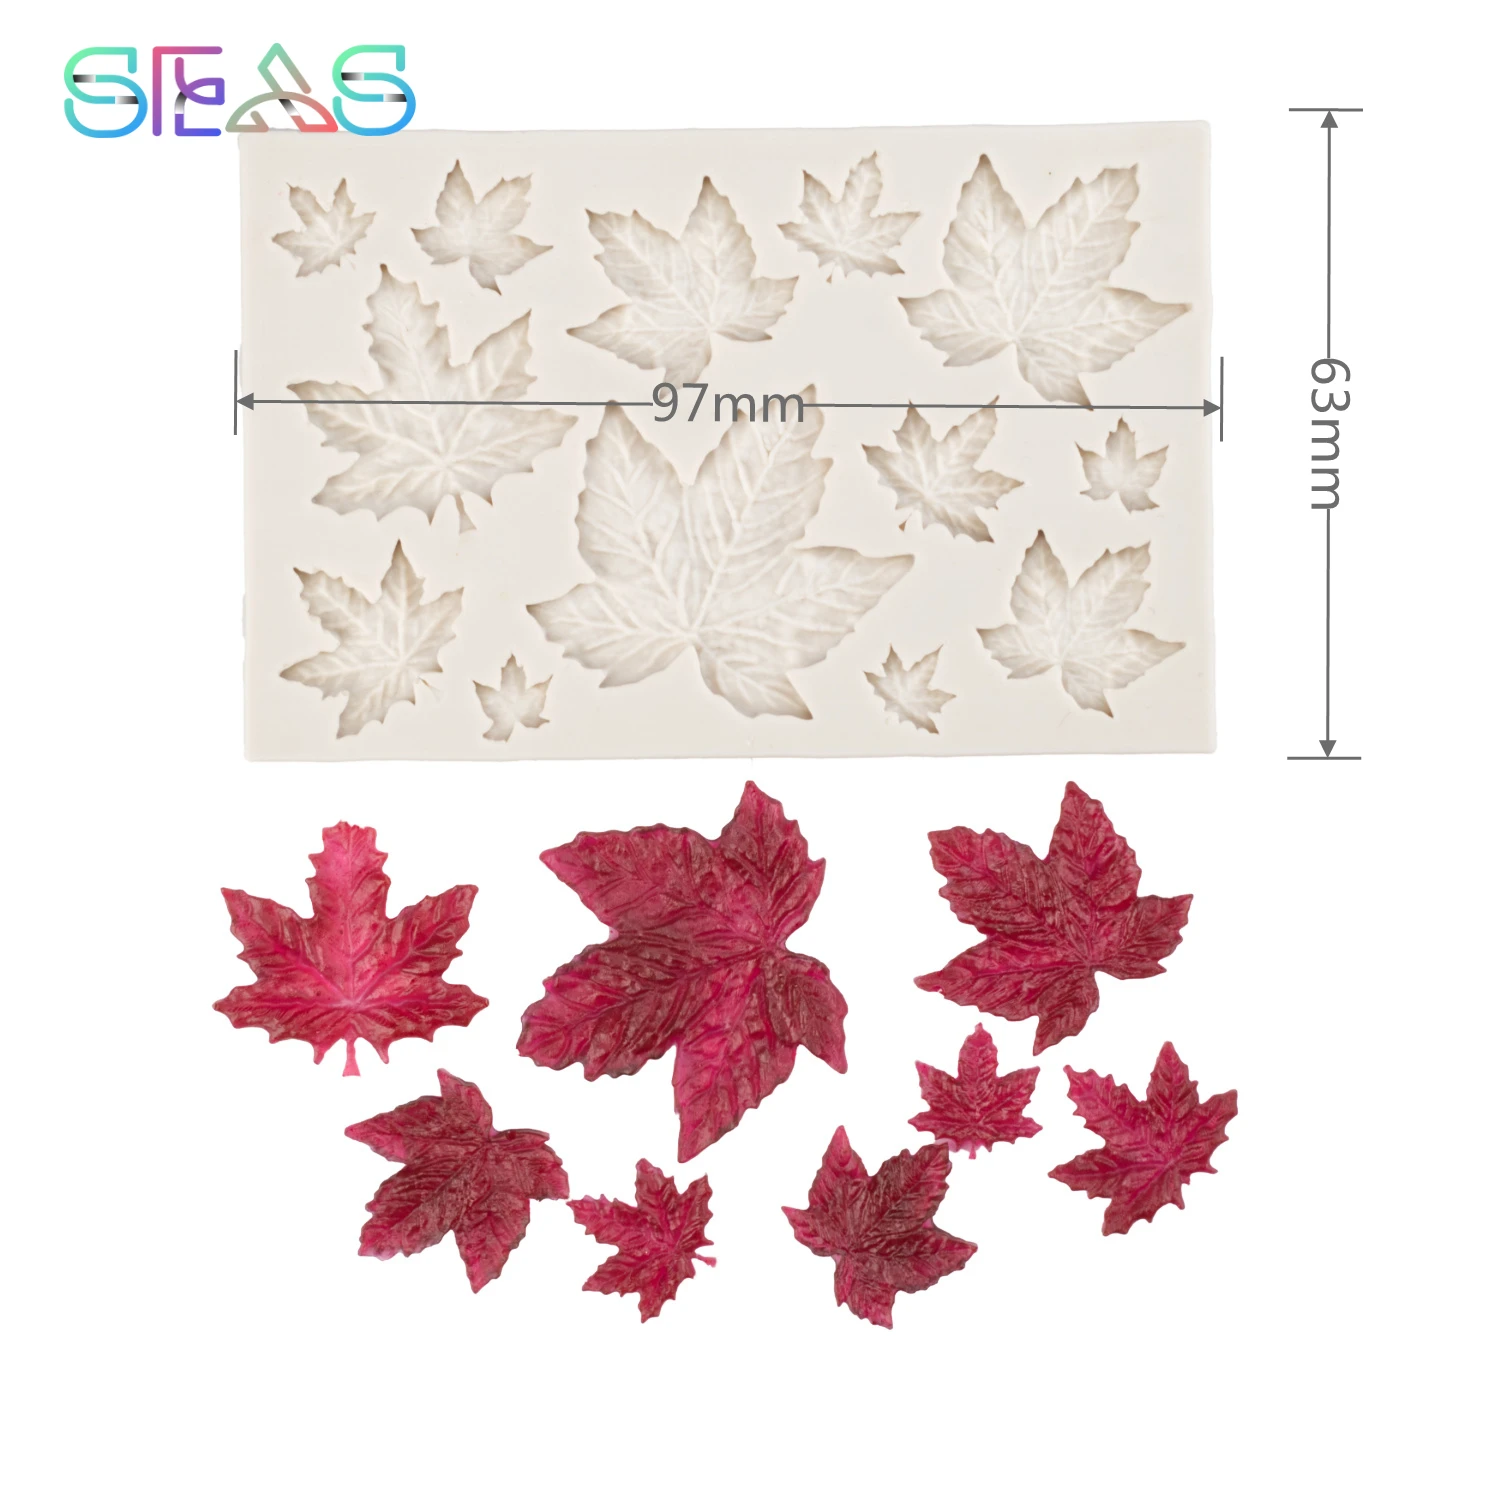 3D Silicone Baking Mold DIY Butterfly Maple Leaf Mould Chocolate Fondant Cake Decorating Tool Temperature Resistance